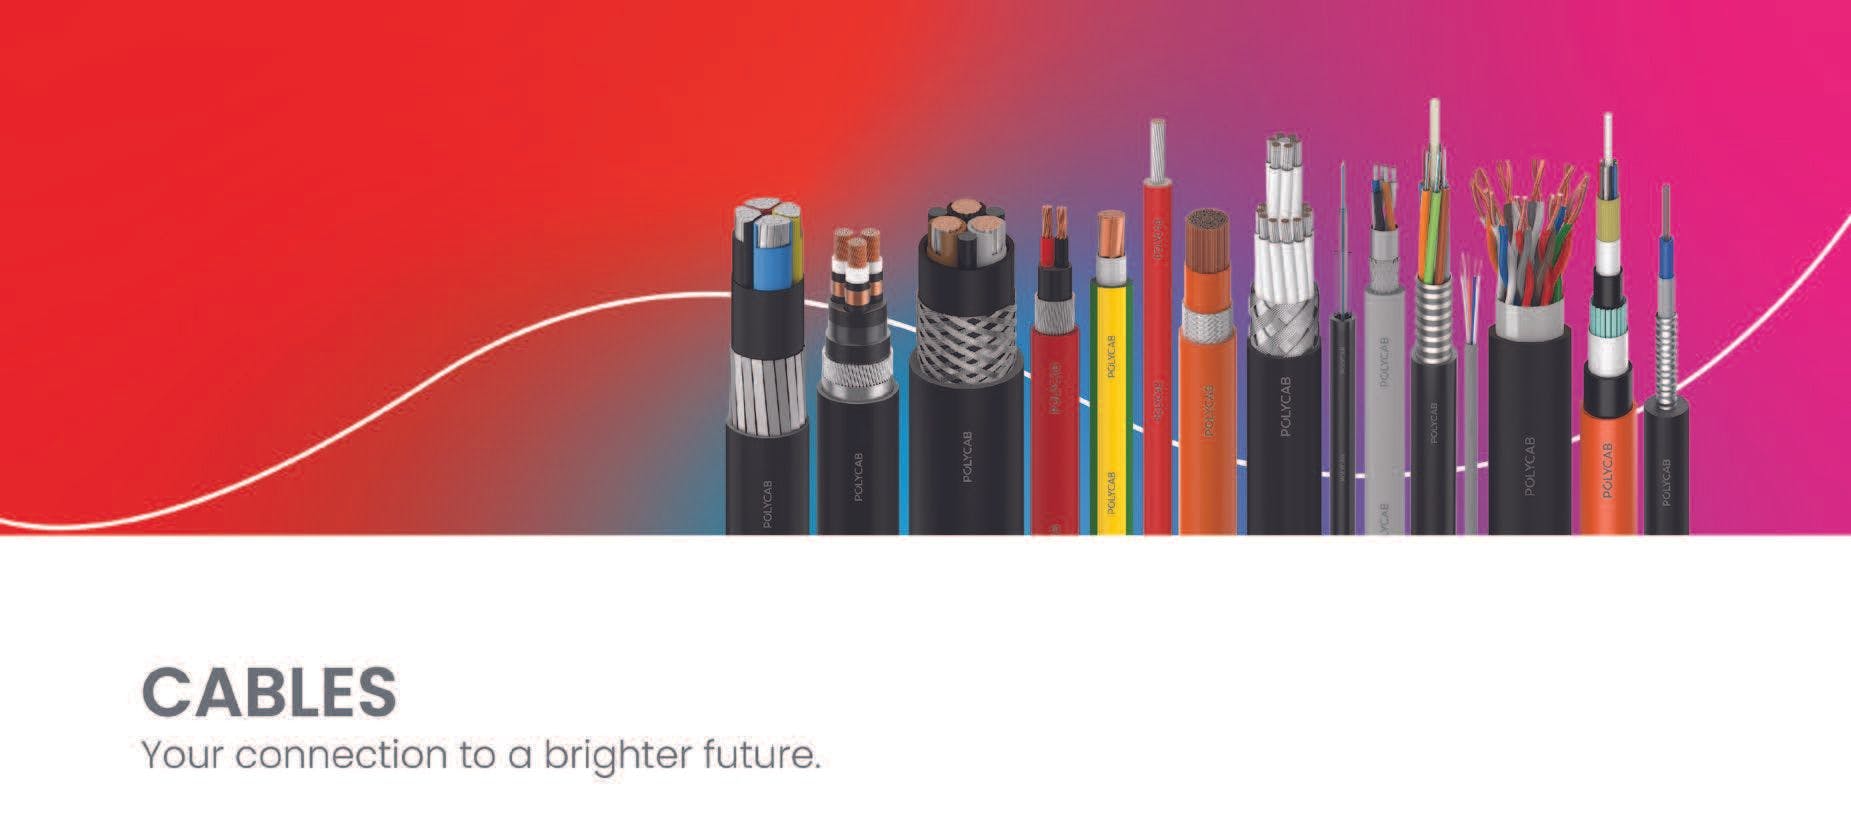 Different types of cables manufactured by Polycab